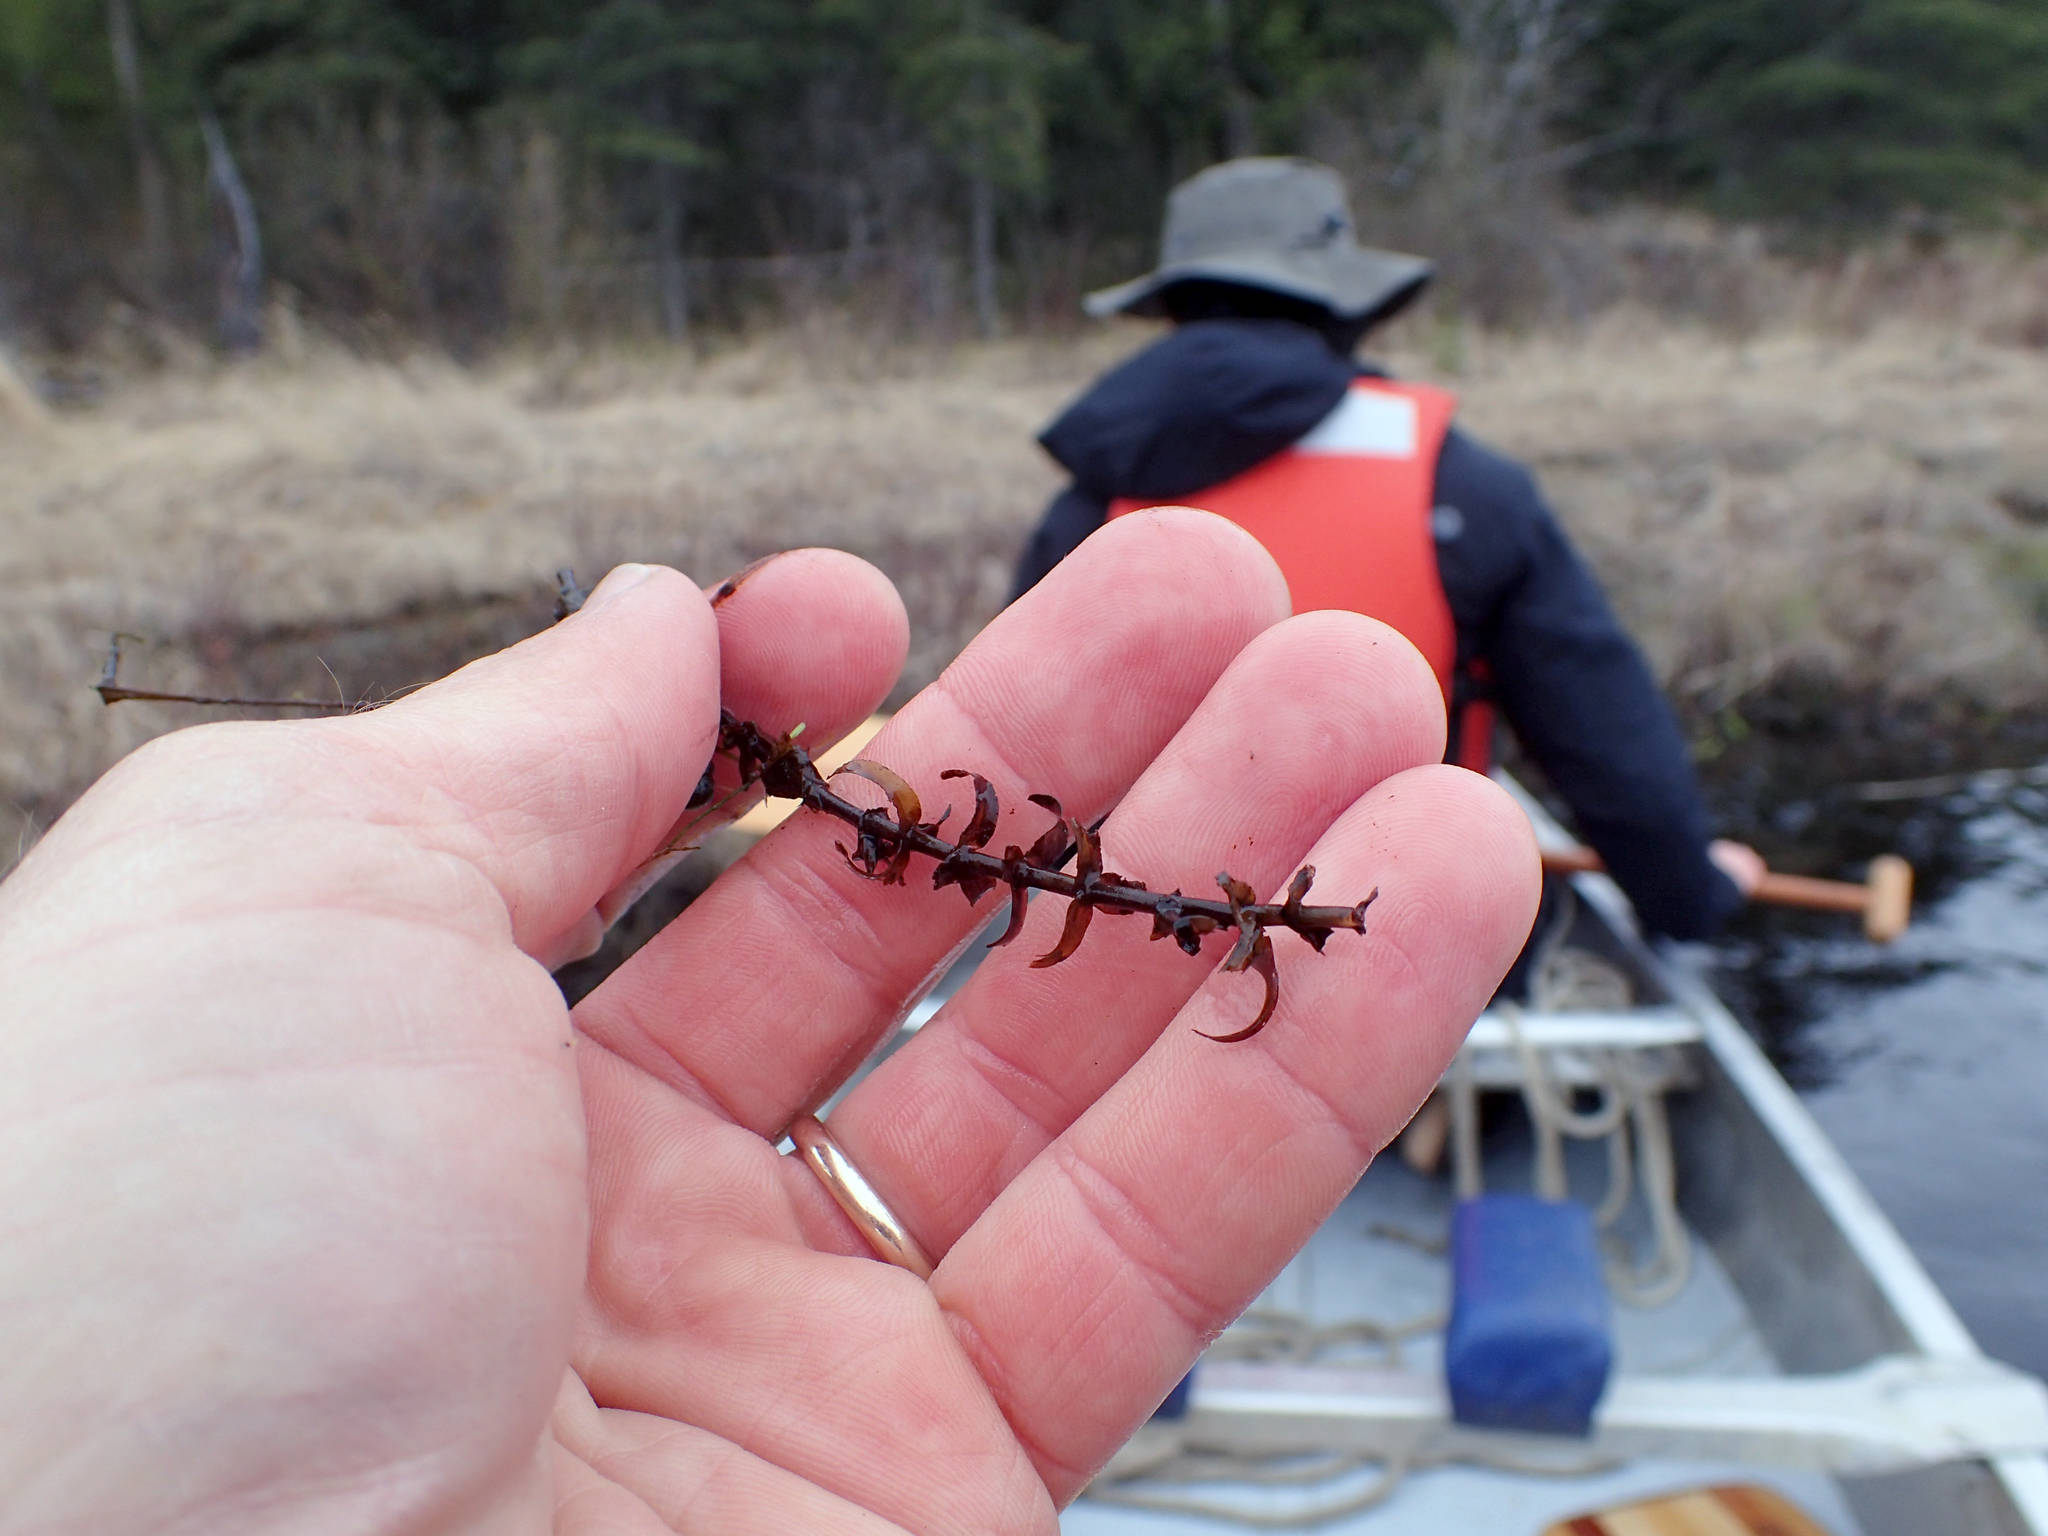 The last strand of elodea on the Kenai Peninsula was found during a survey in May 2019. This fragment is brown and brittle, signs of dying from having been treated with herbicide since 2017. (Photo by Matt Bowser/Kenai National Wildlife Refuge).
The last strand of elodea on the Kenai Peninsula was found during a survey in May 2019. This fragment is brown and brittle, signs of dying from having been treated with herbicide since 2017. (Photo by Matt Bowser/Kenai National Wildlife Refuge).